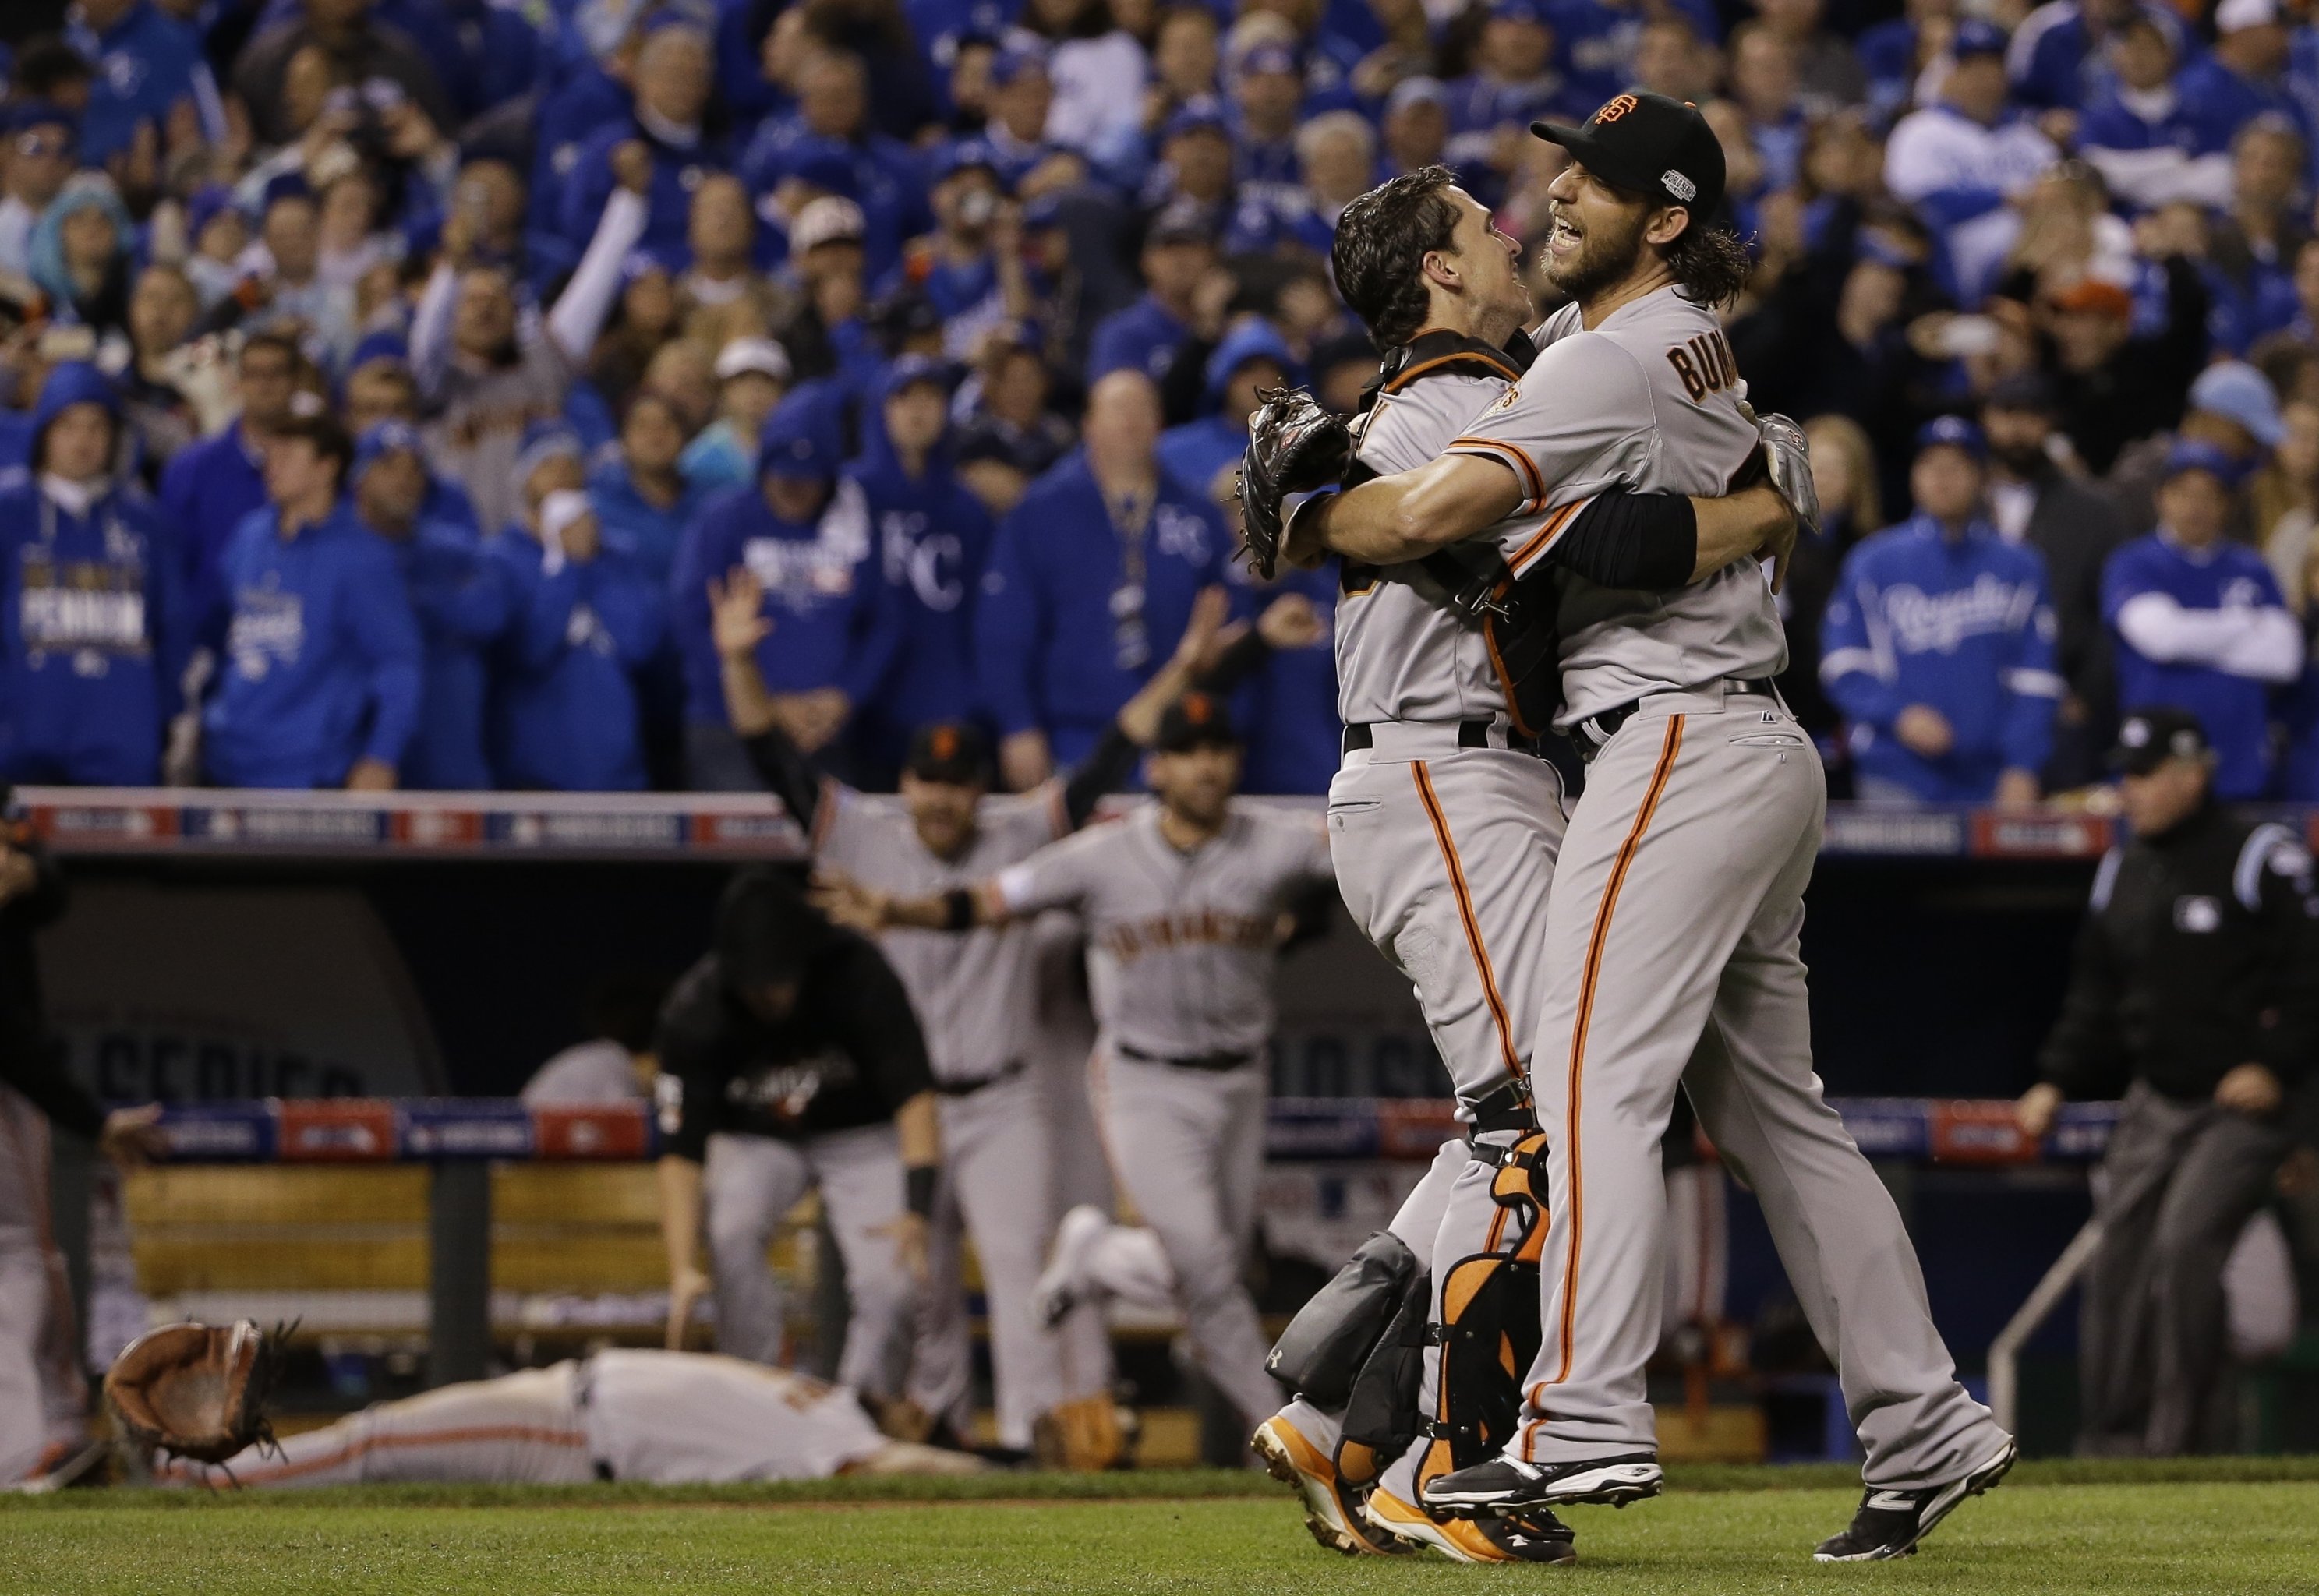 Giants' Game 7 romp led by Cain, Scutaro